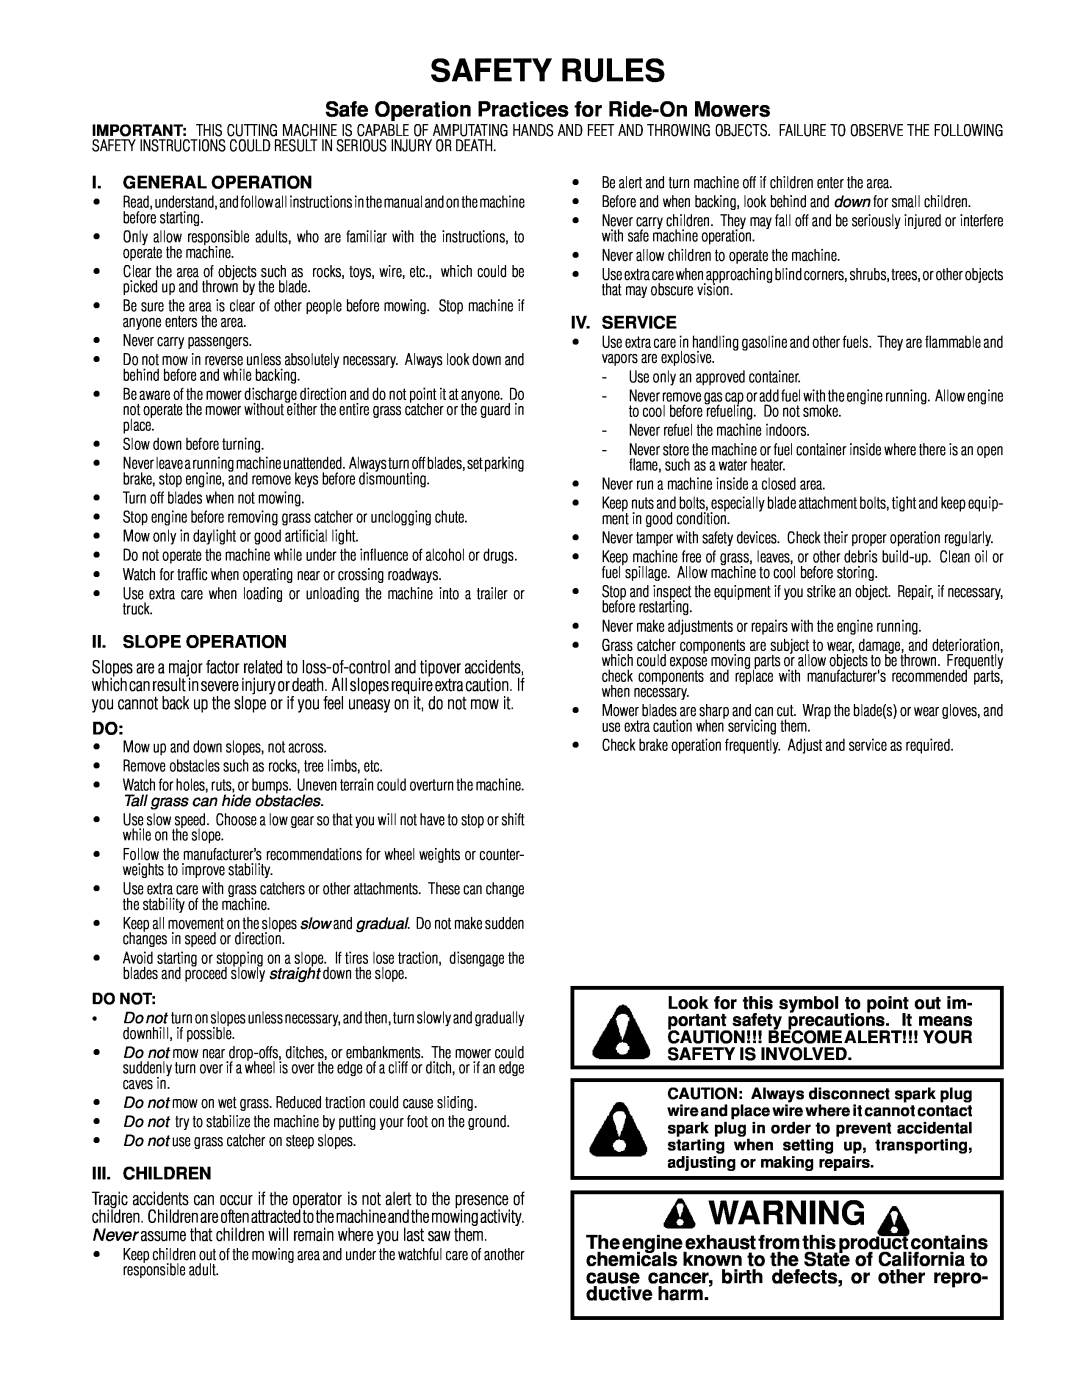 Poulan 161608 owner manual Safety Rules, Safe Operation Practices for Ride-On Mowers, Do Not 